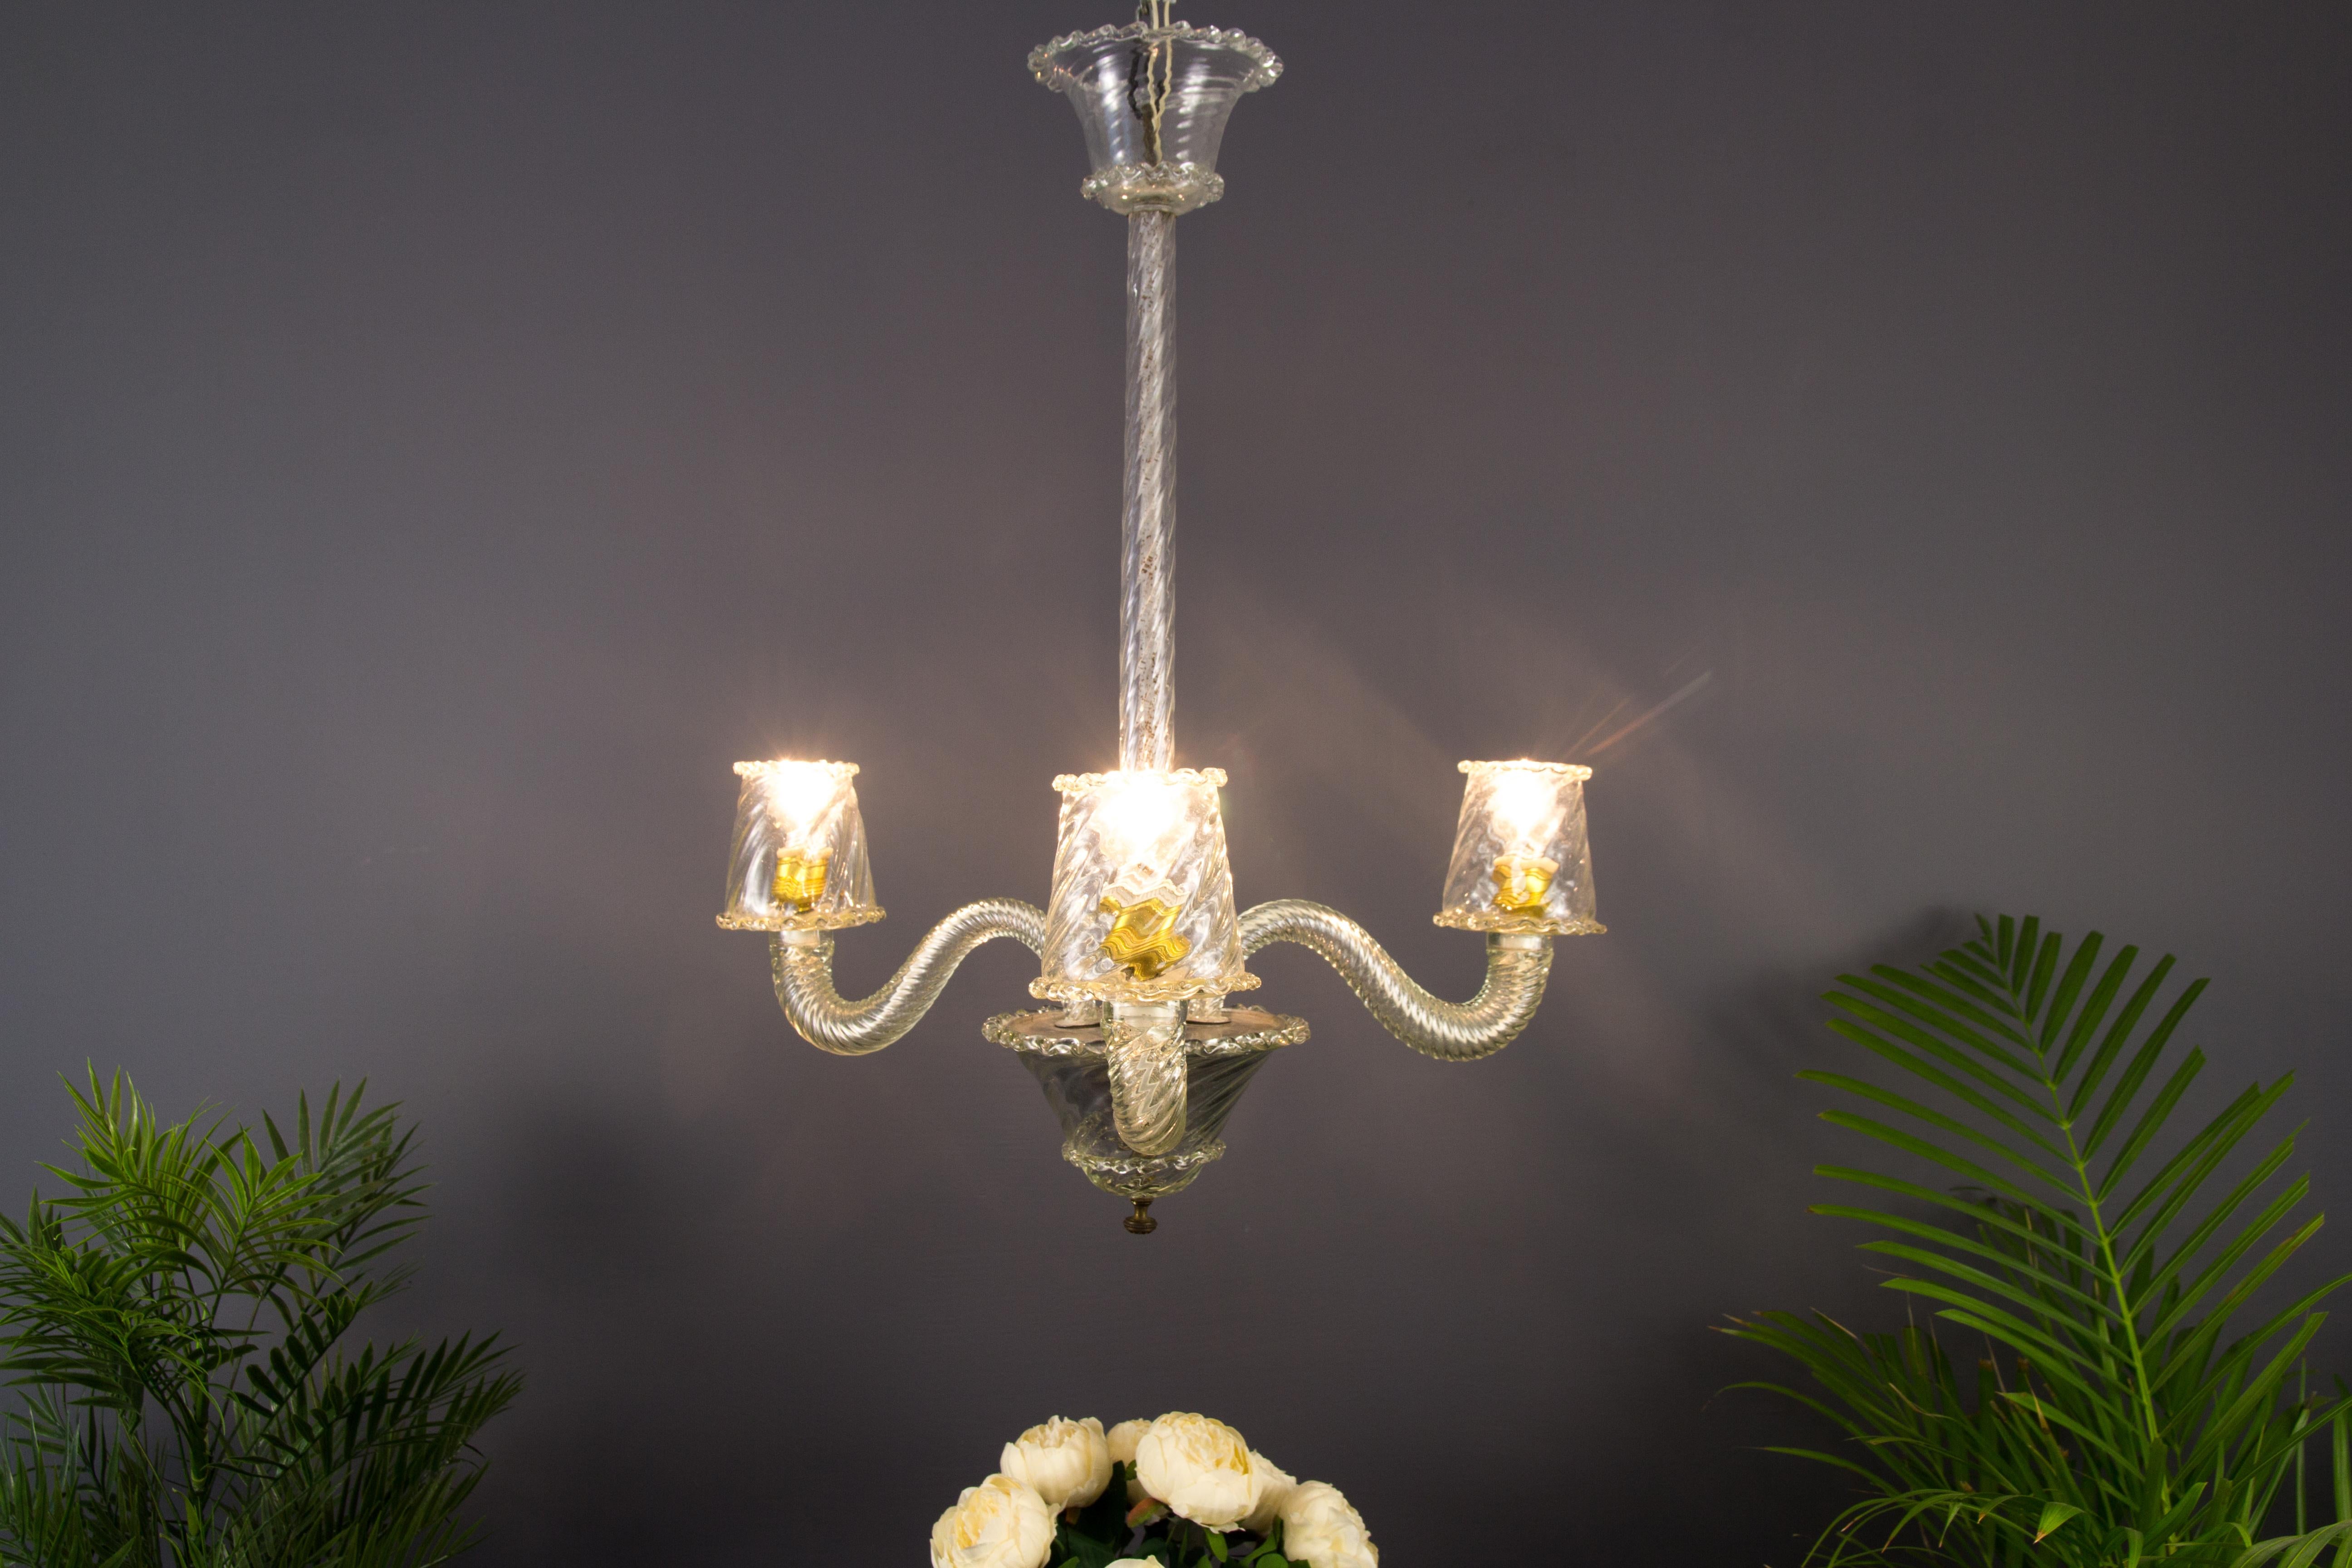 Beautiful Italian Art Deco style Murano transparent white glass chandelier from the 1930s. Three arms each with one socket for the E 27 light bulb.
Measures: Height is 26.37 in / 67 cm, diameter 21.65 in / 55 cm.
   